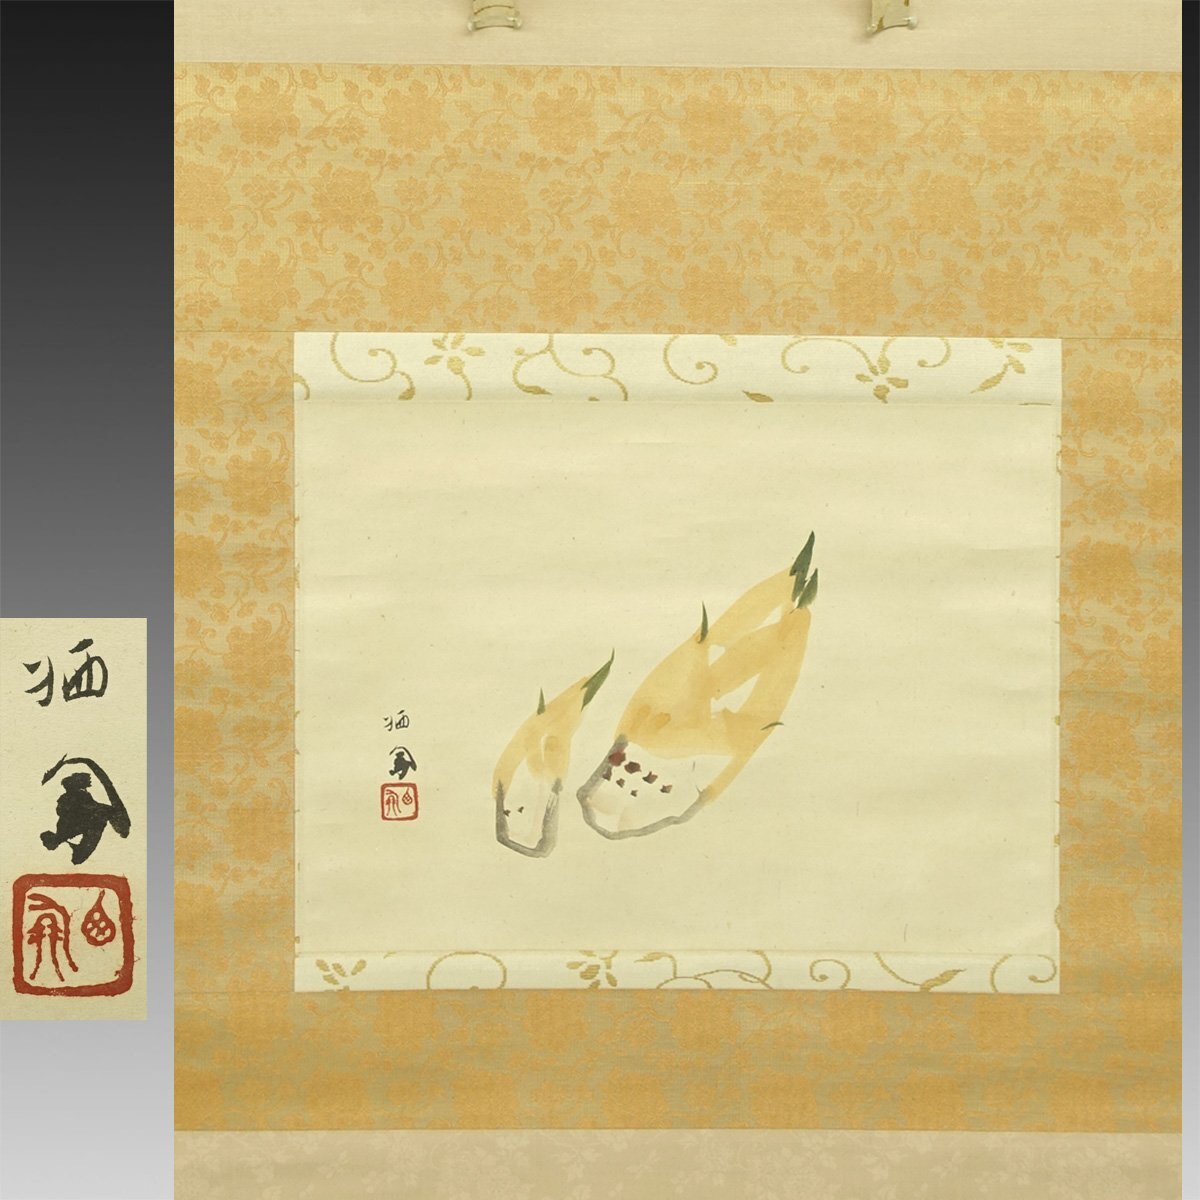 [Authentic work] Kimon◆ Takeuchi Seiho Bamboo shoots (Bamboo shoots) 1 width Old handwriting Old document Old book Japanese painting Modern painting Kachuan Order of Culture recipient Chinese painting Tea ceremony Kyoto Taisho-Showa, artwork, book, hanging scroll